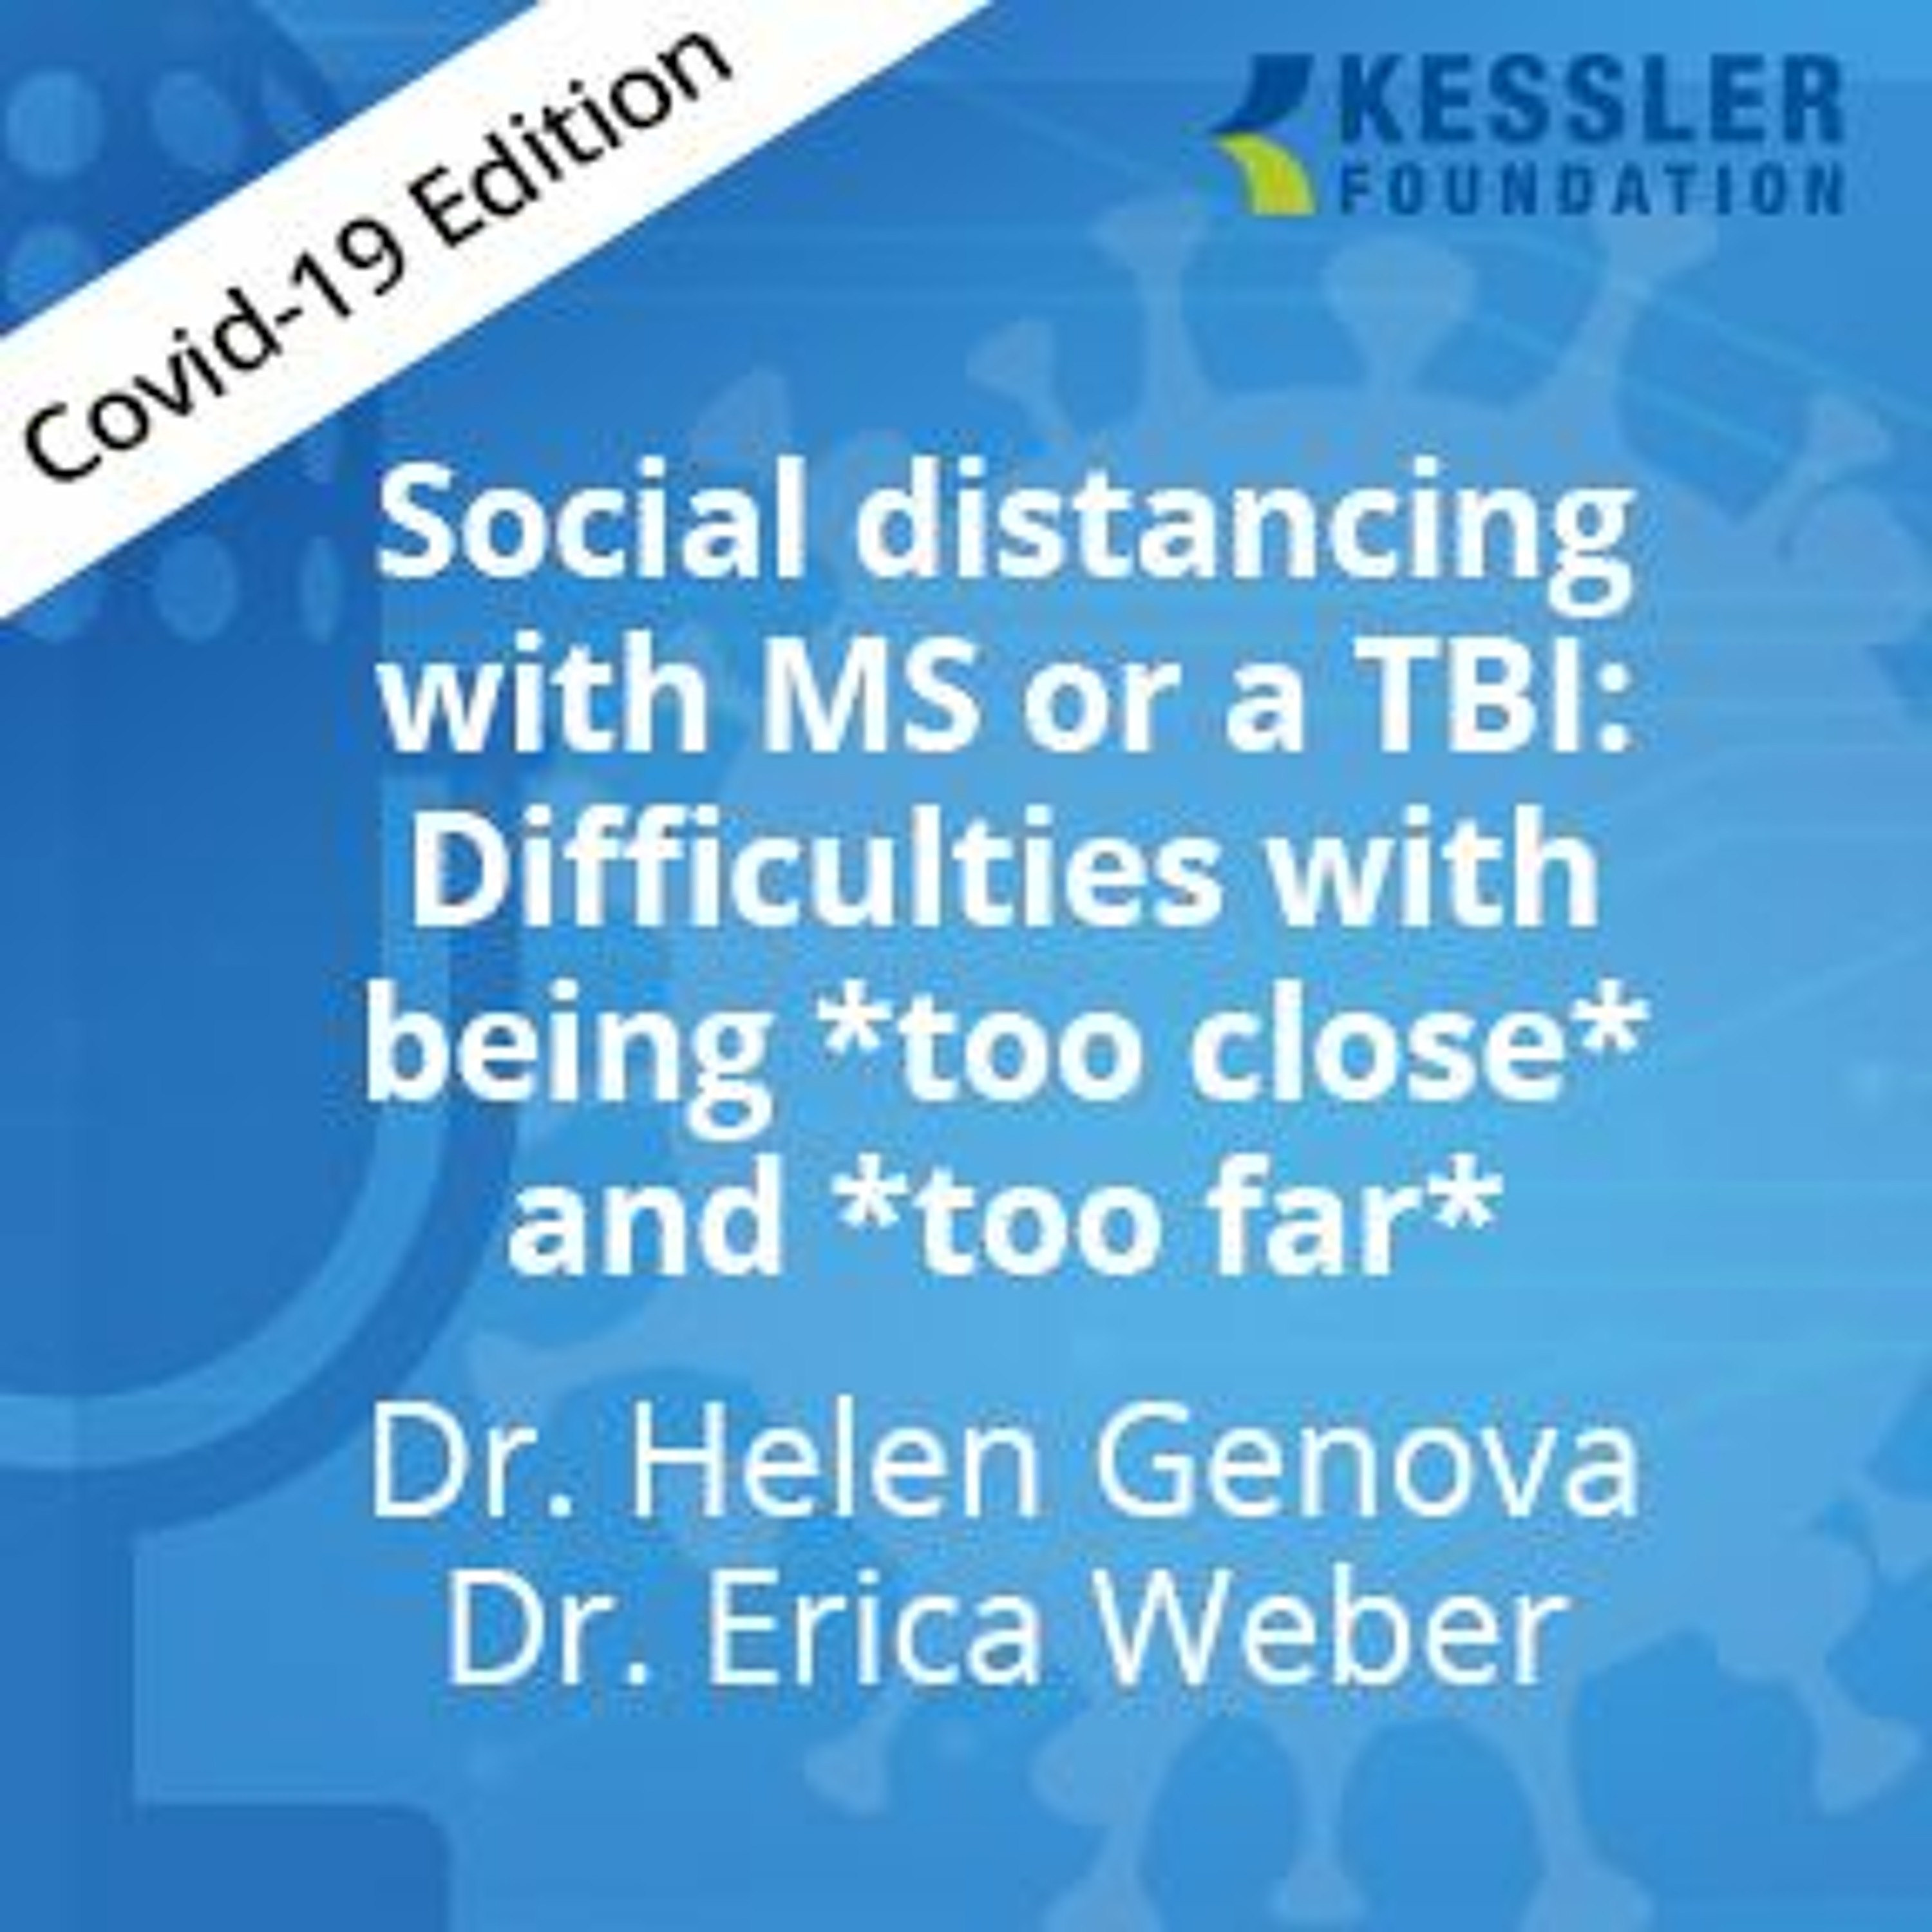 Social distancing with MS or a TBI: Difficulties with being *too close* and *too far*-COVID-19, Ep3